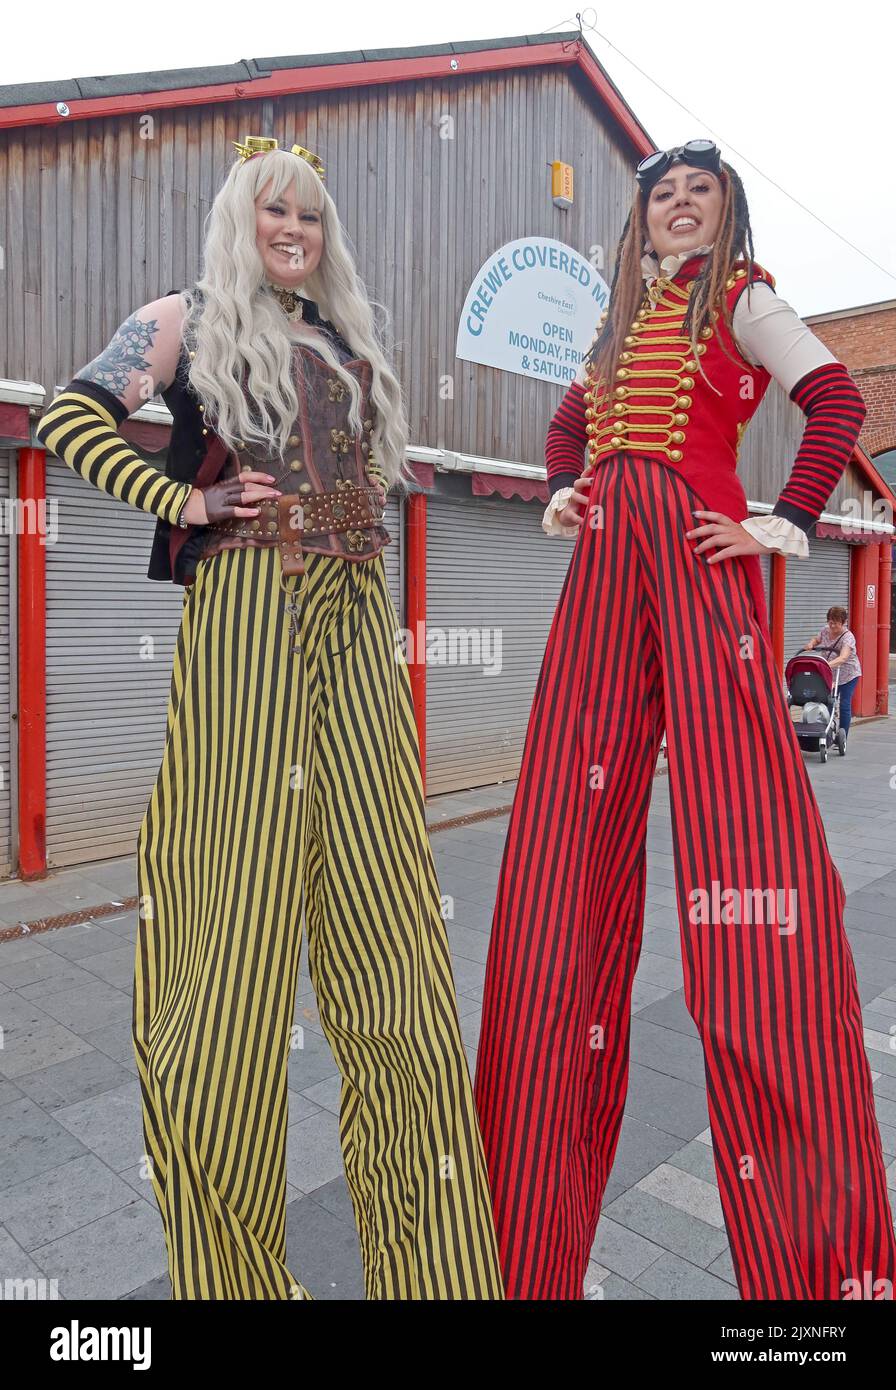 Two tall lady Stiltwalkers at Crewe covered Market Stock Photo